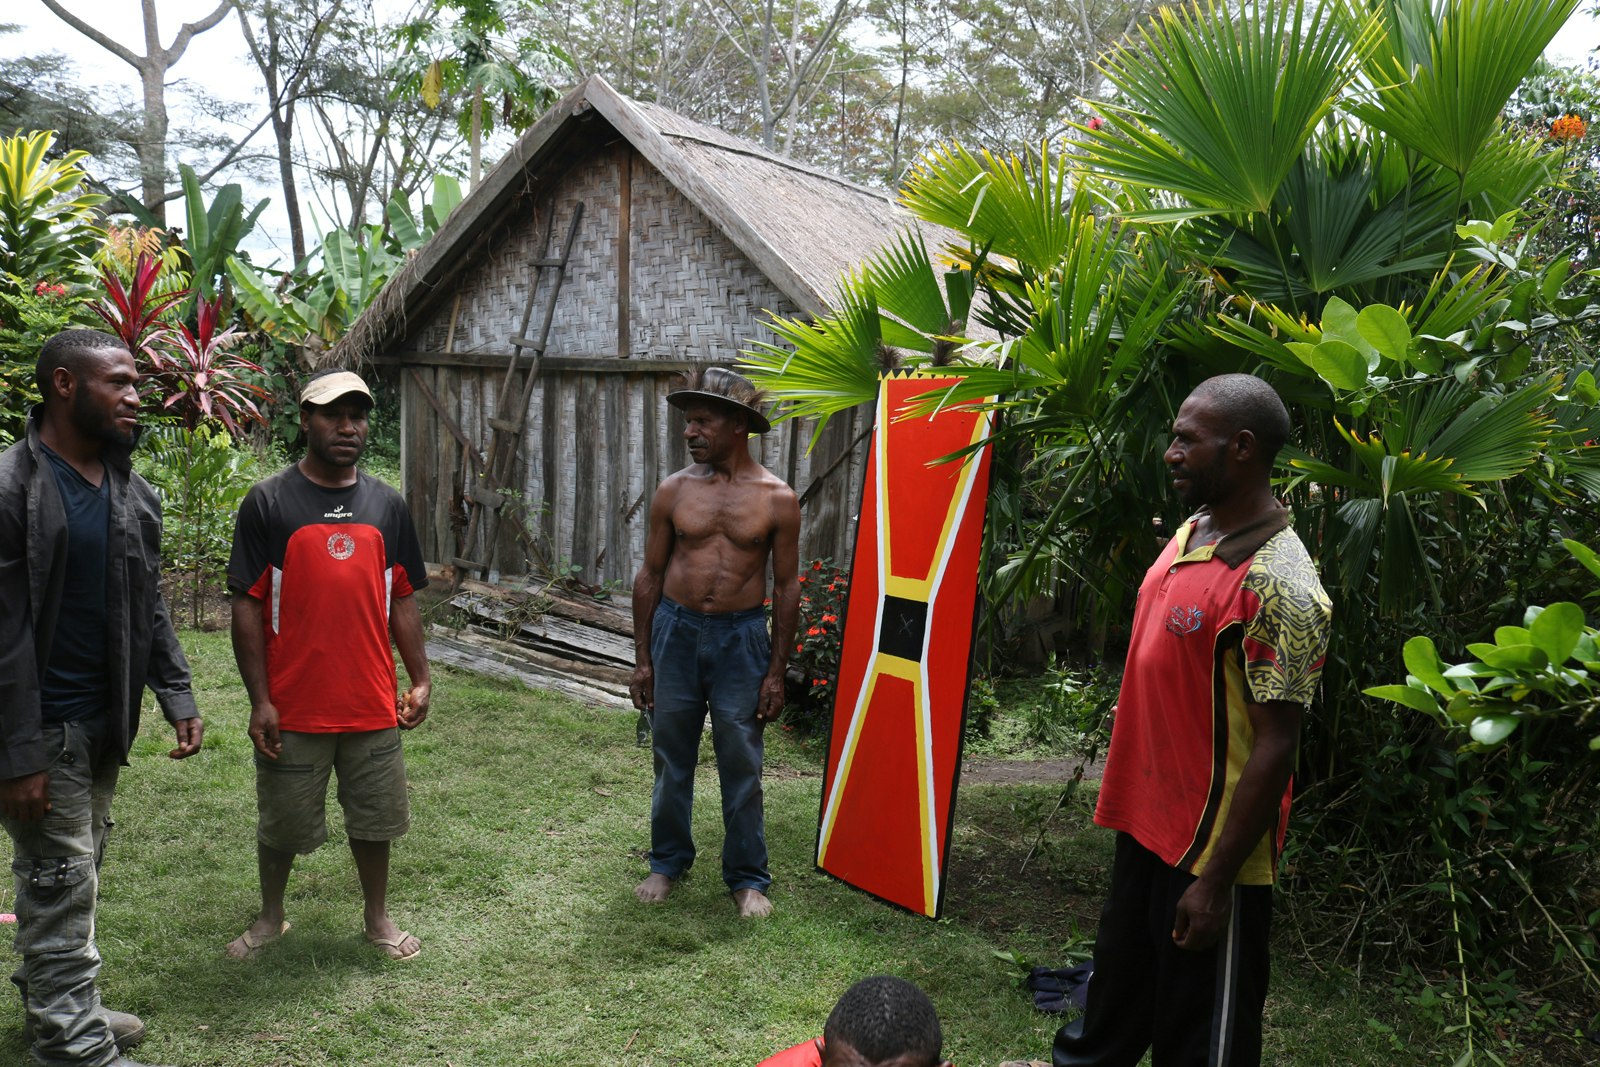 Four dark-skinned Pasifika men, some dressed in bright red shirts, one wearing a jacket and the other shirtless and wearing a hat, stand outside a thatch house, surrounding a red kuman (shield) painted with white and yellow lines. 